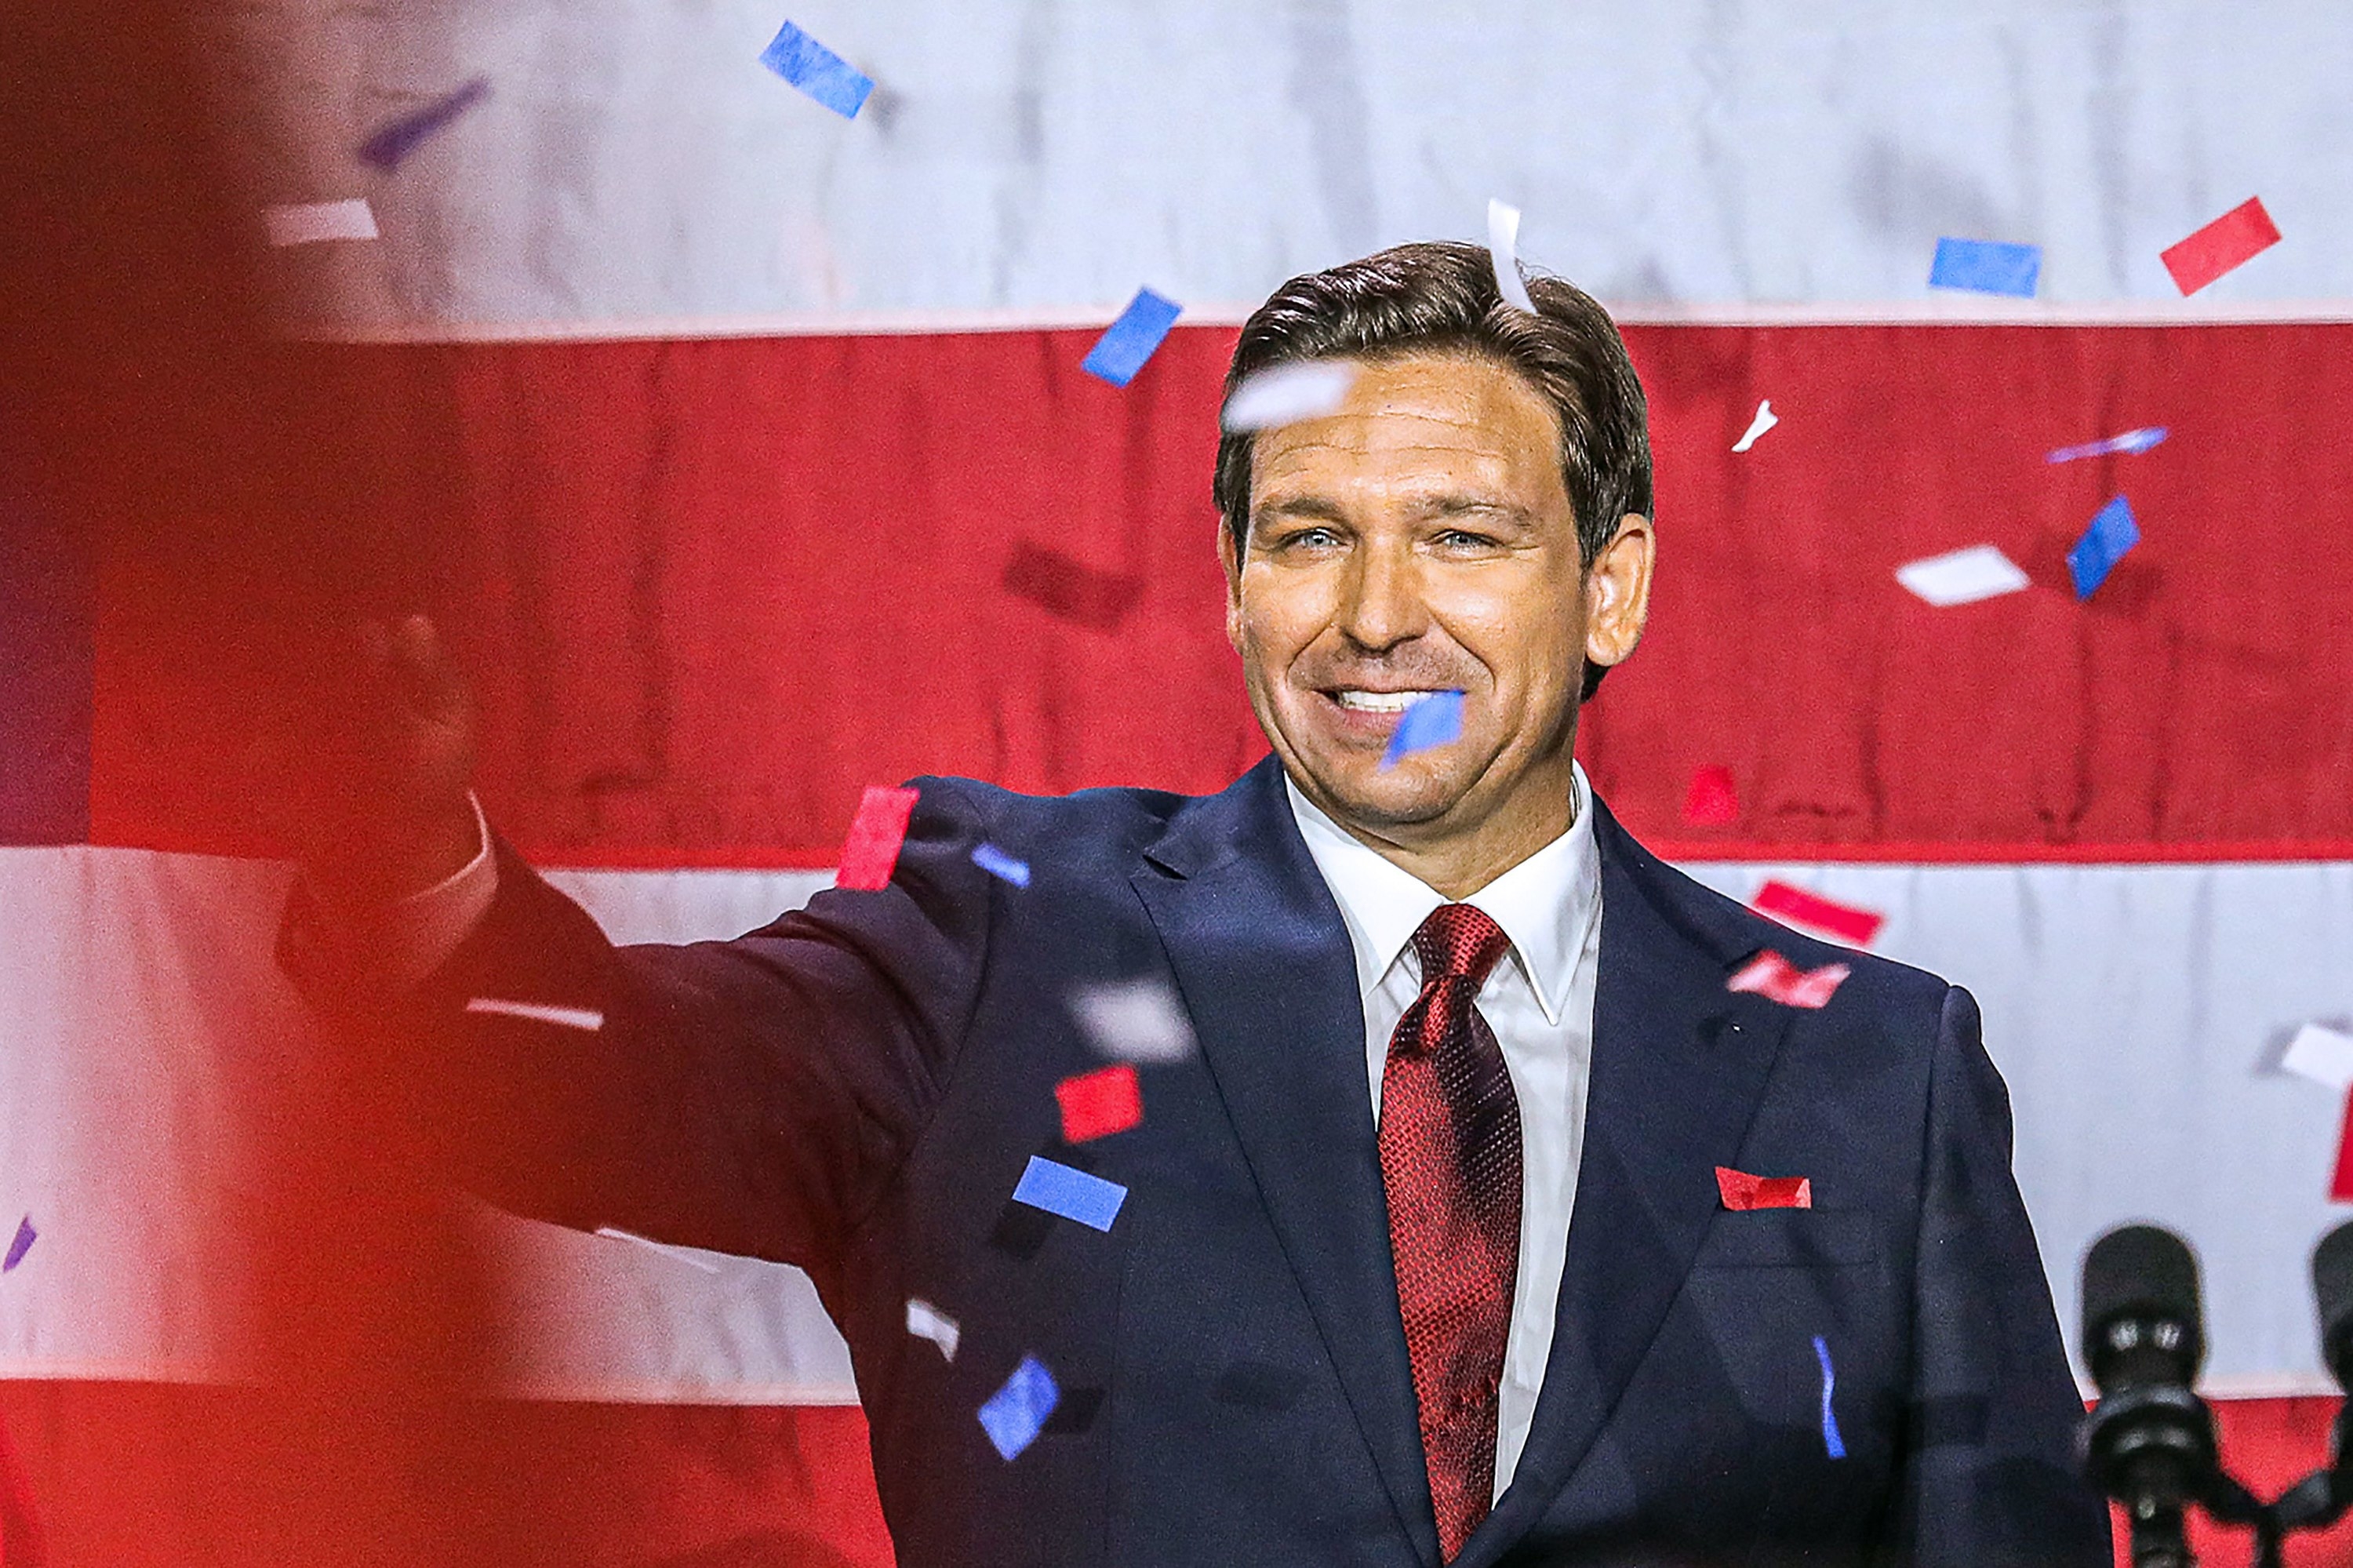 DeSantis showered in confetti standing in front of the US flag